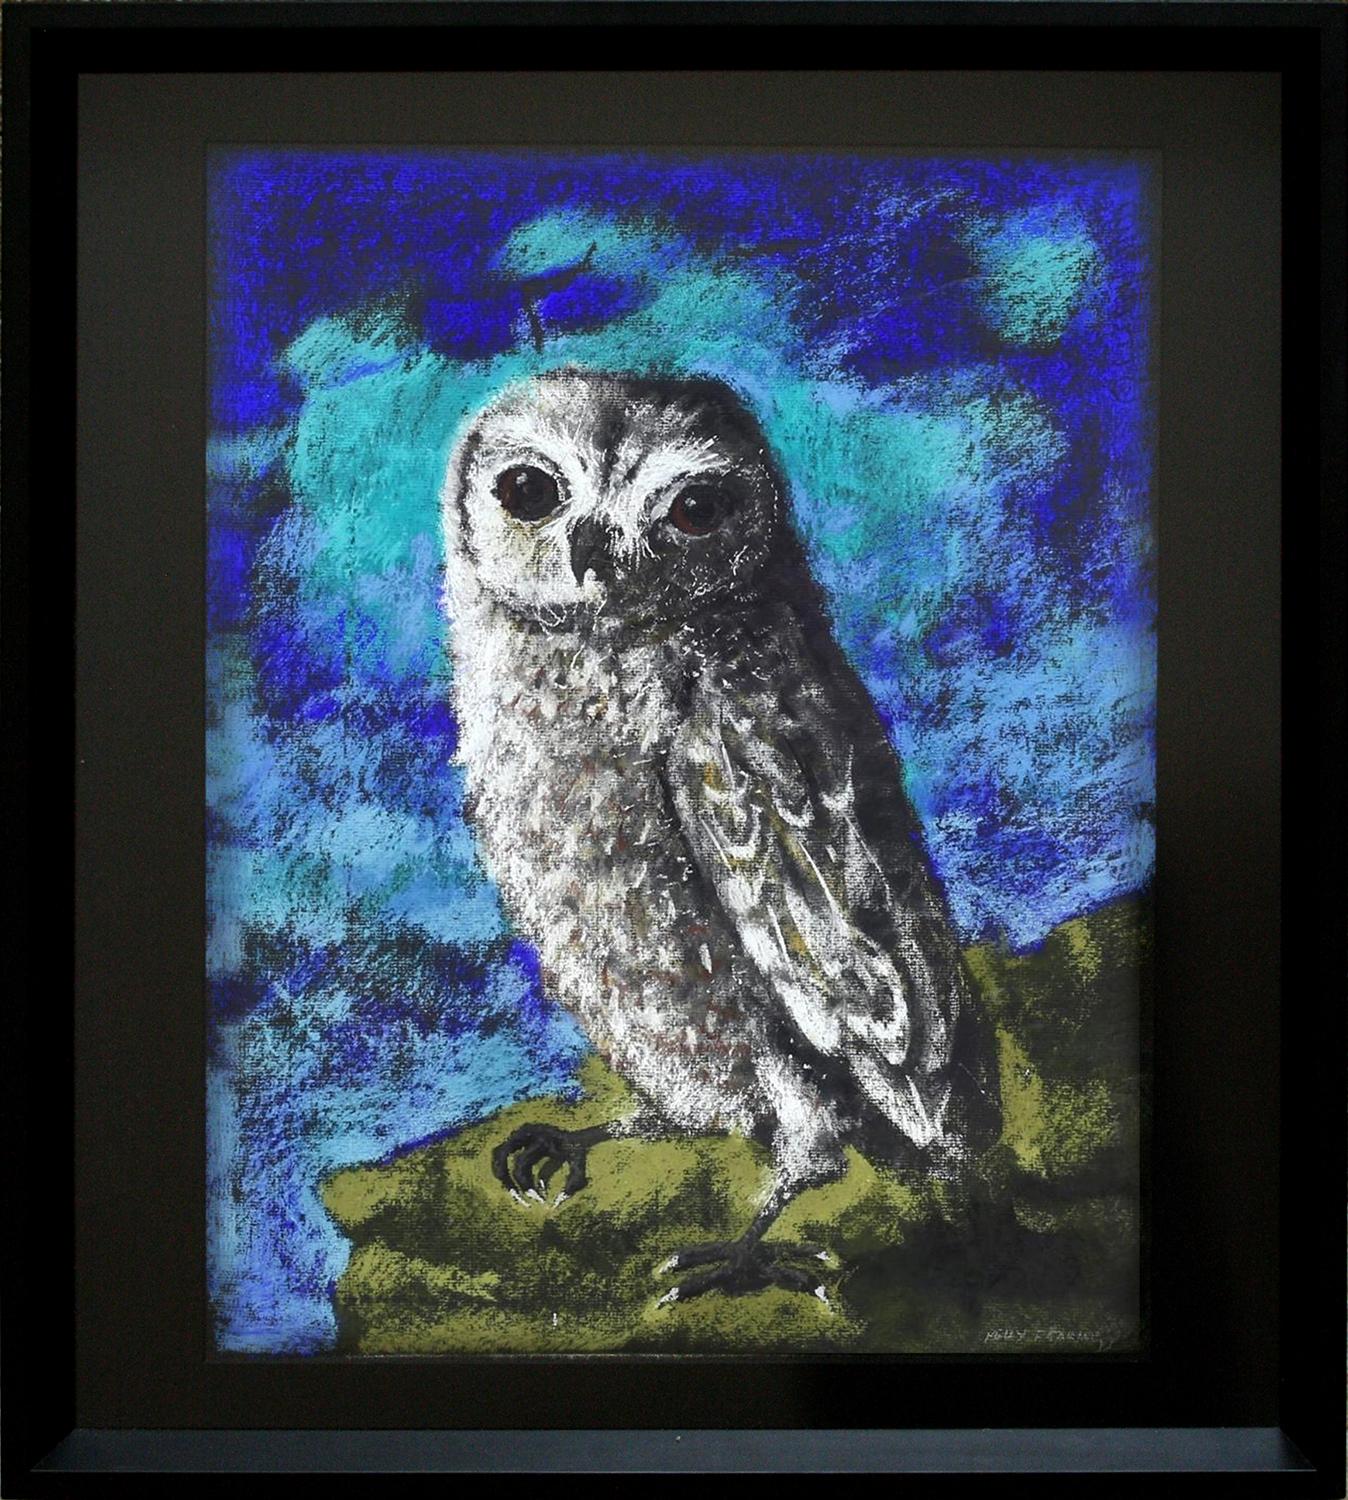 This pastel painting by Kelly Fearing is of a grey owl with a vivid blue background.  It is perched on a ledge rendered in green earth tones. The work is framed in a black wooden frame. 

Kelly Fearing (American, 1918-2011)
Owl, 1972
Pastel on